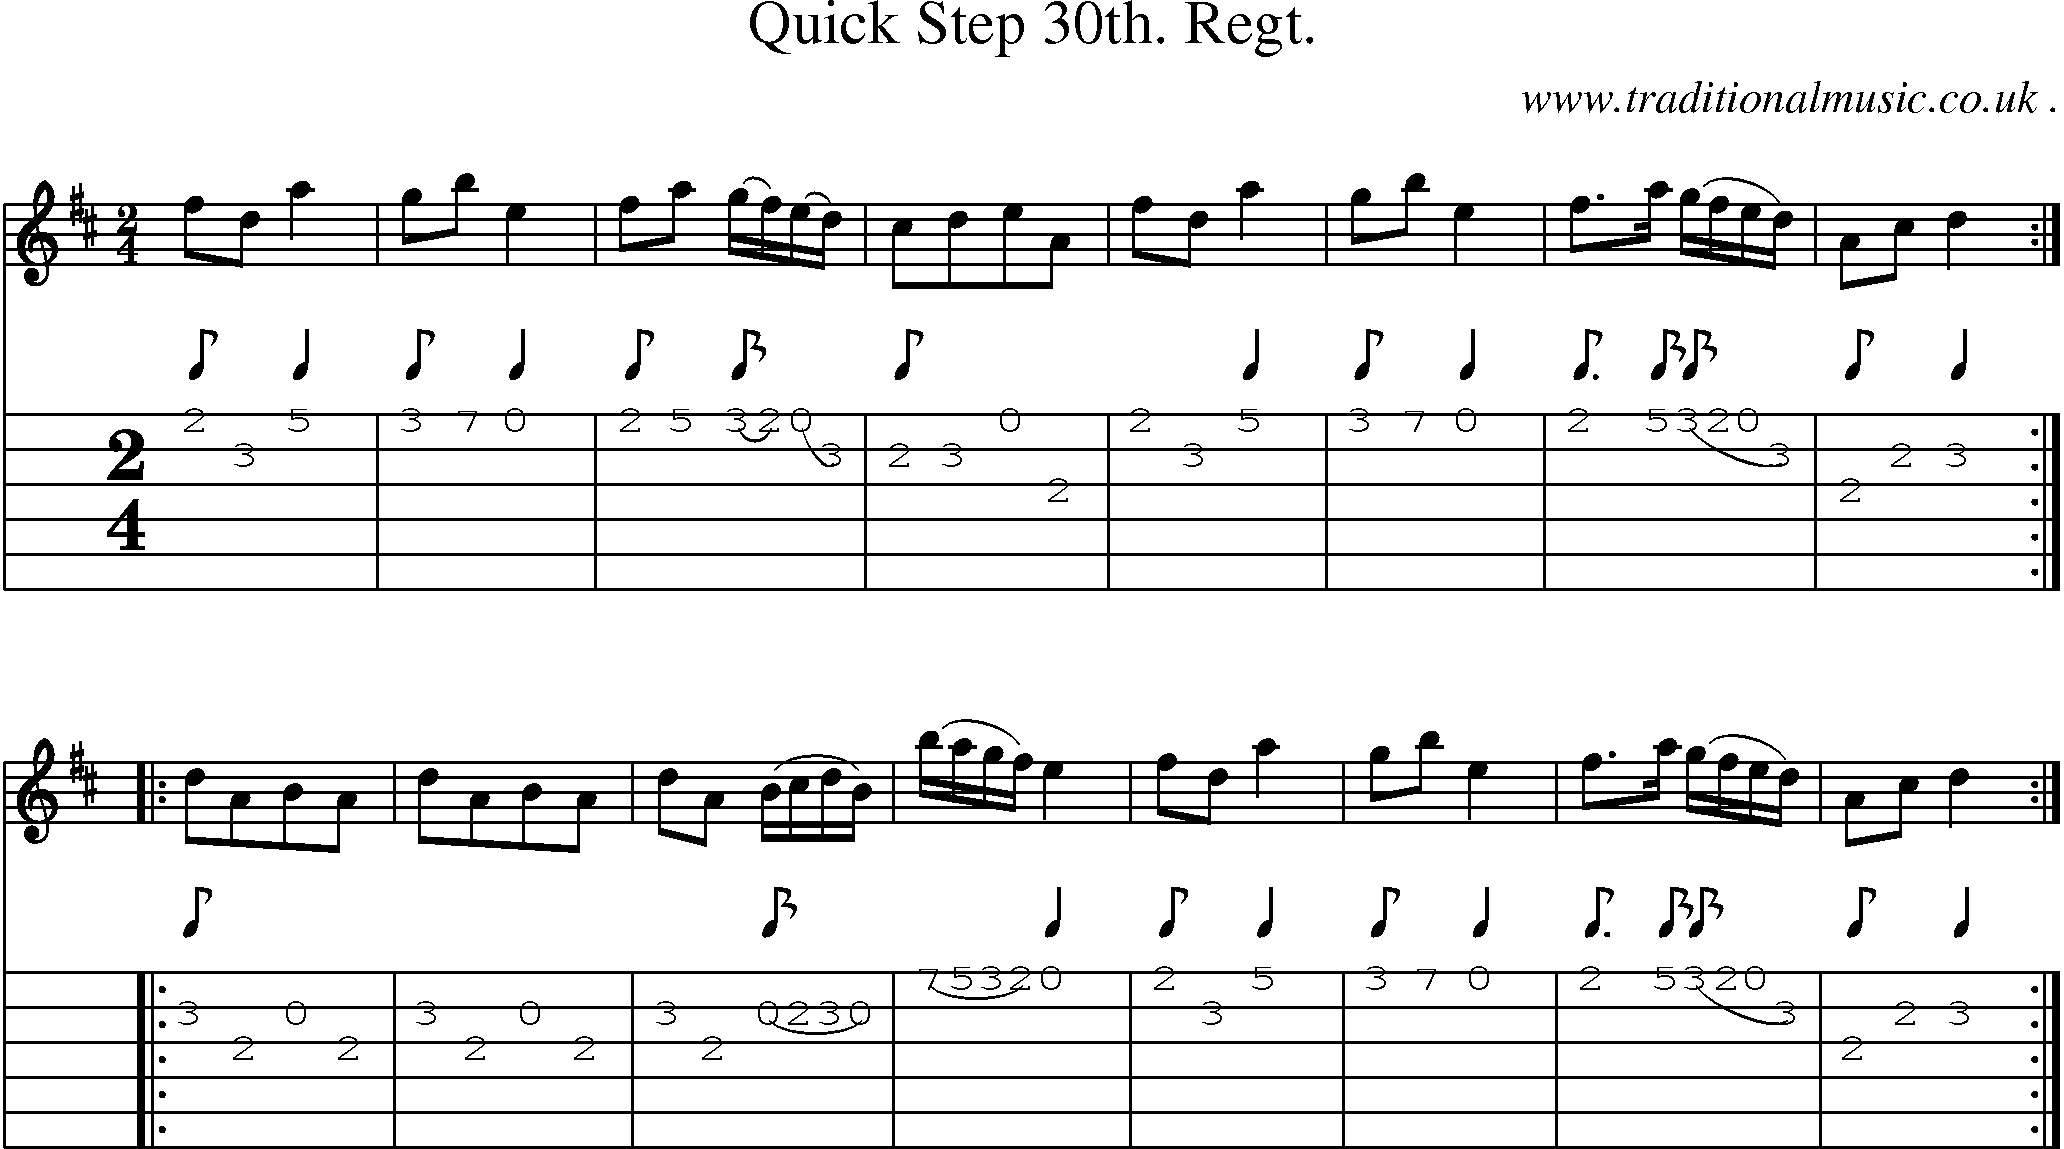 Sheet-music  score, Chords and Guitar Tabs for Quick Step 30th Regt